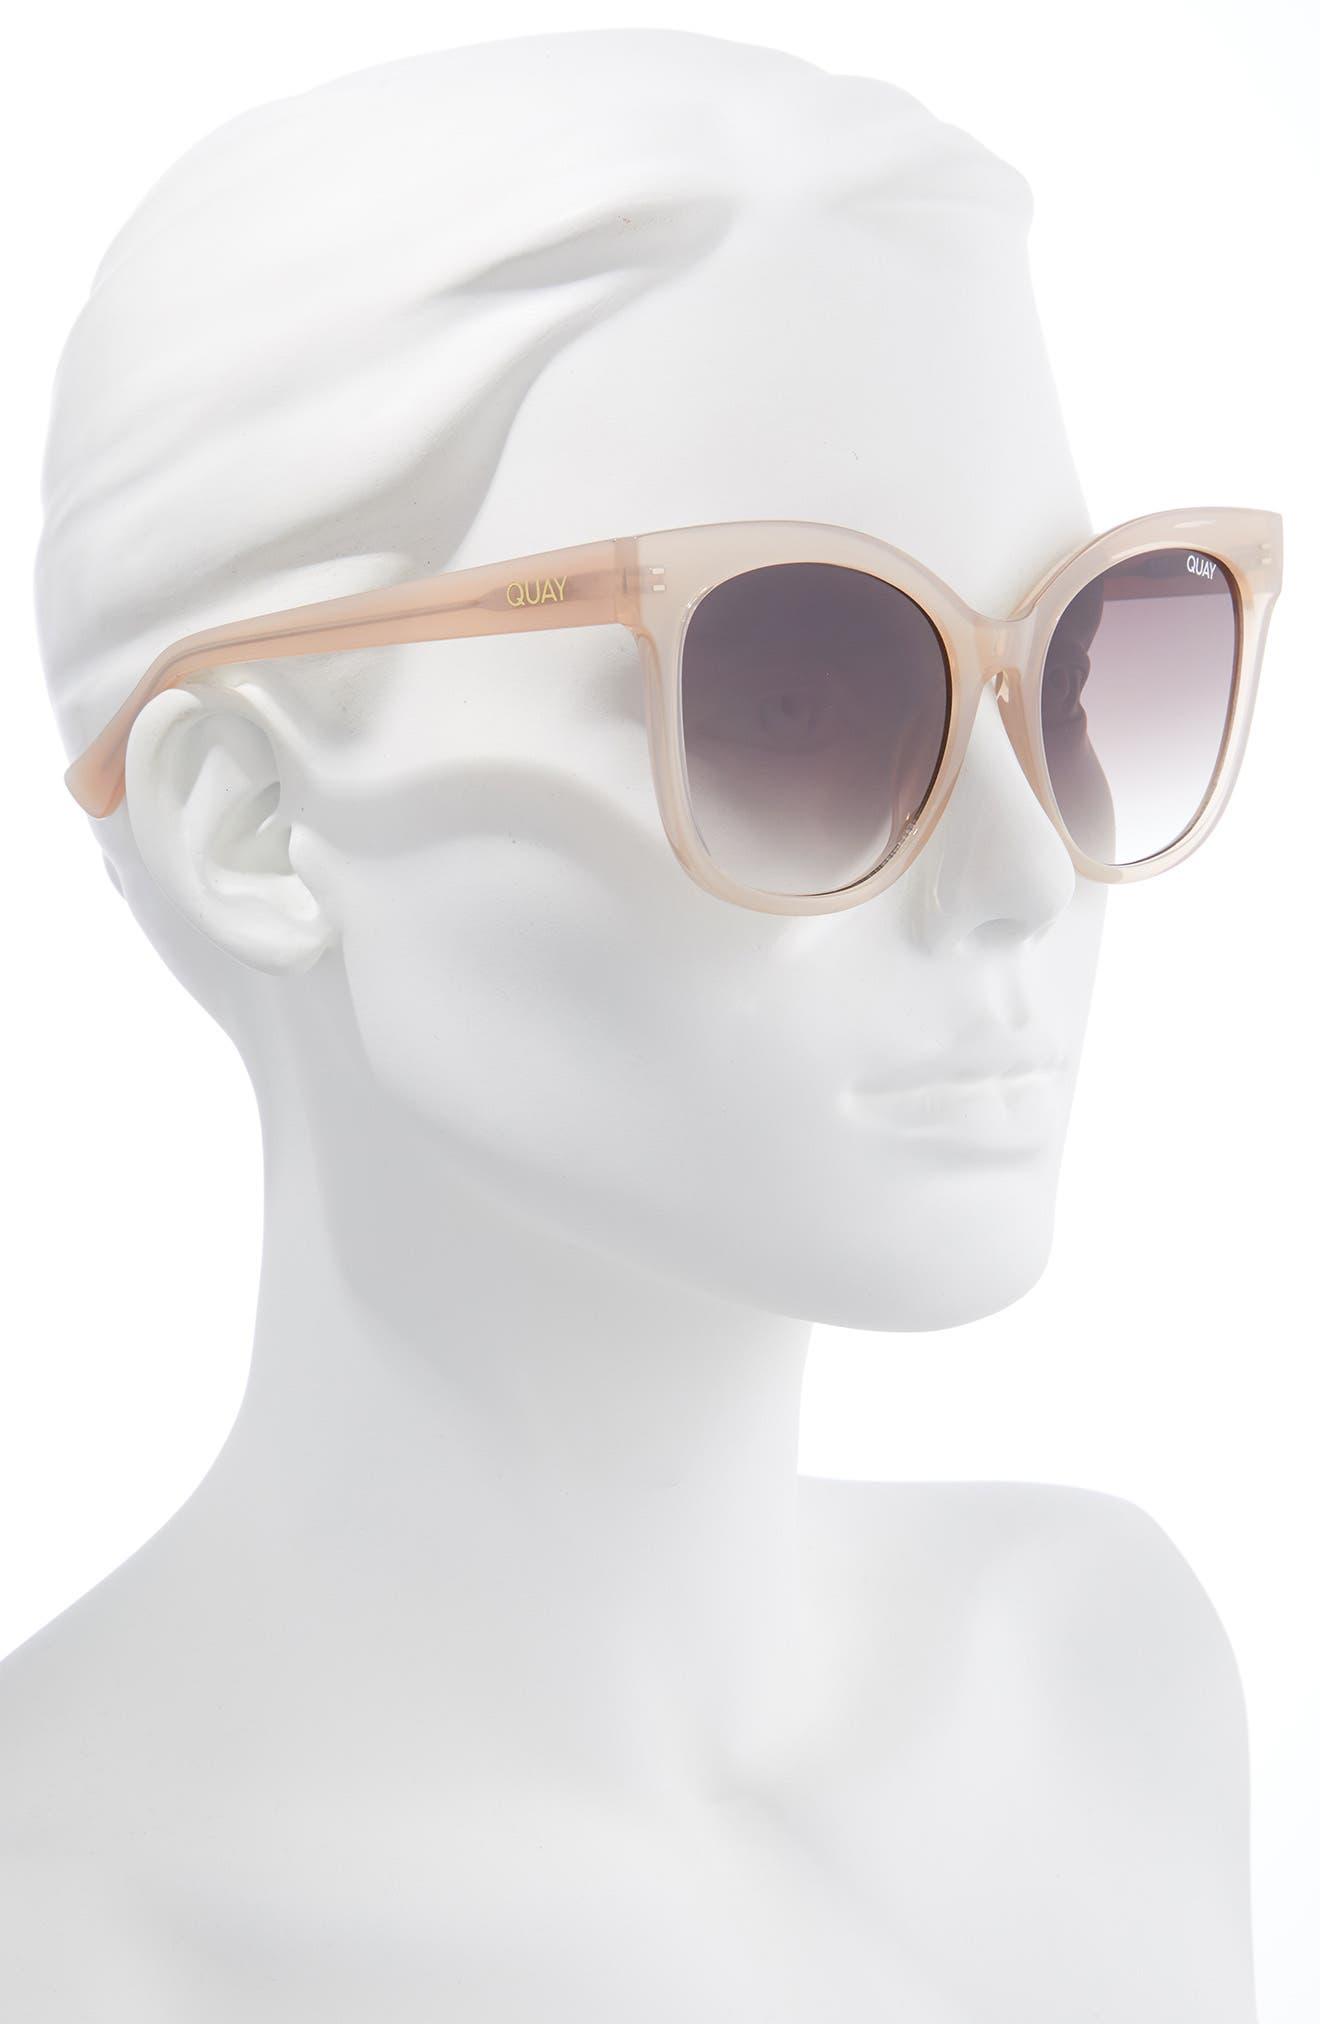 Quay Its My Way 61mm Gradient Cat Eye Sunglasses in Brown | Lyst